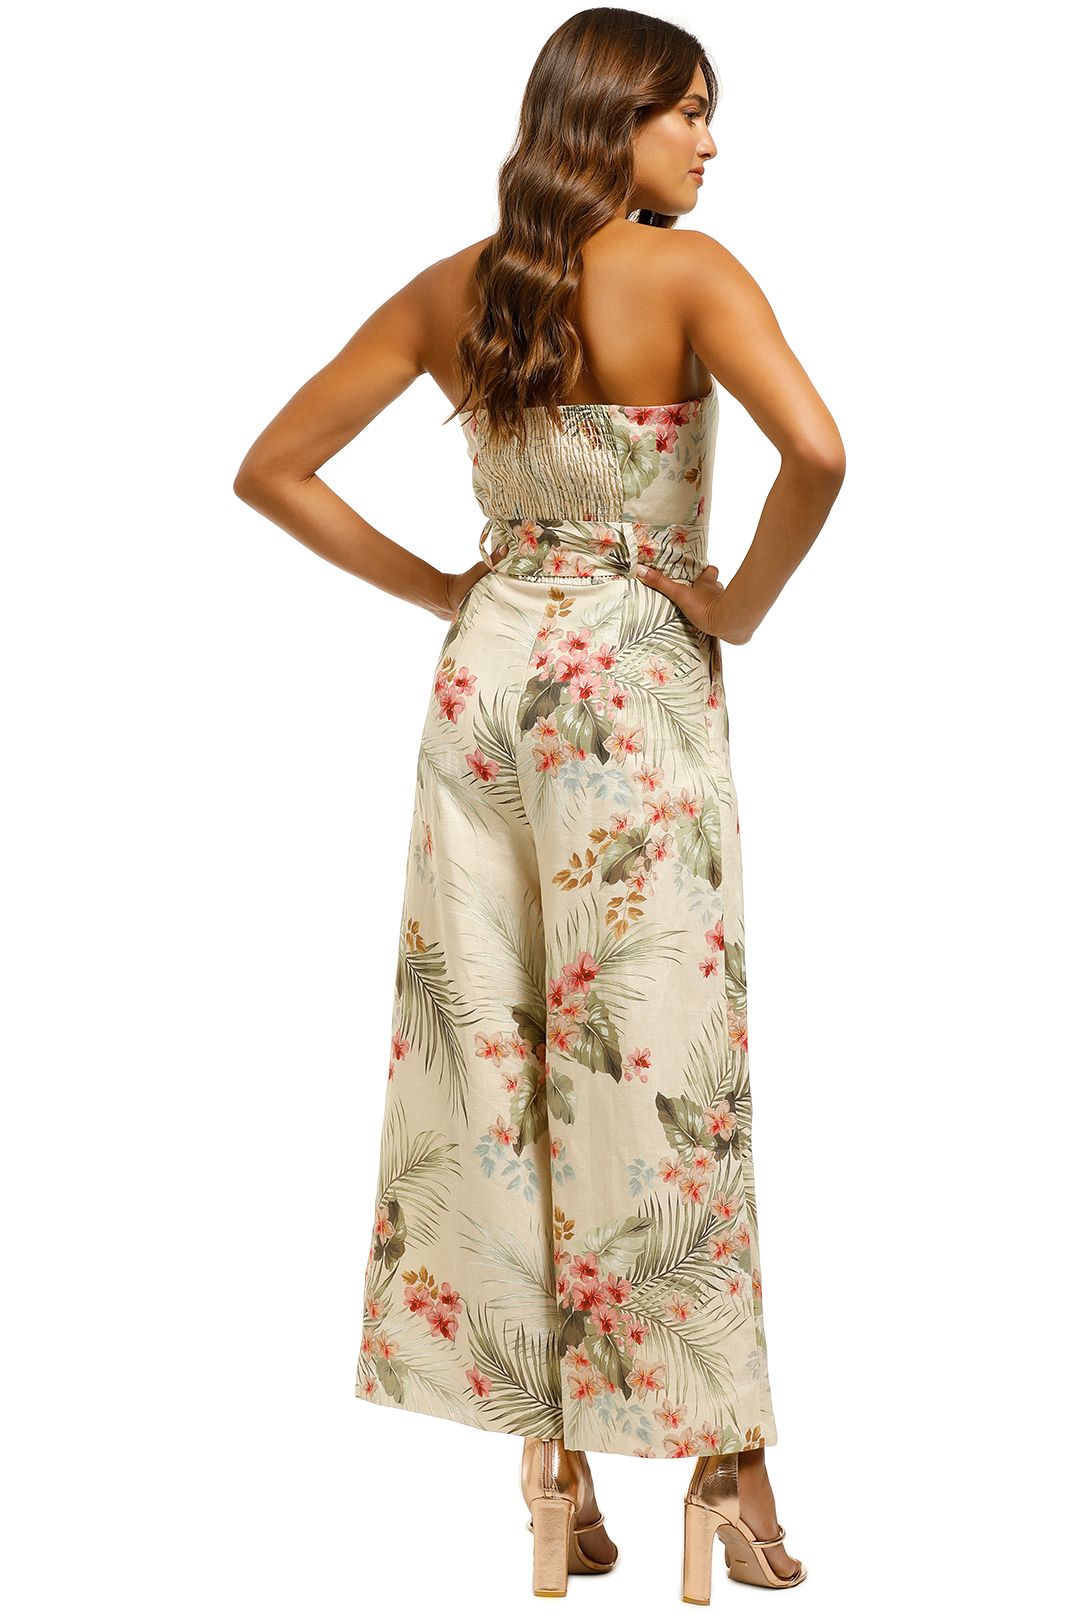 Ministry-of-Style-Paradiso-Strapless-Jumpsuit-Paradiso-Print-Back